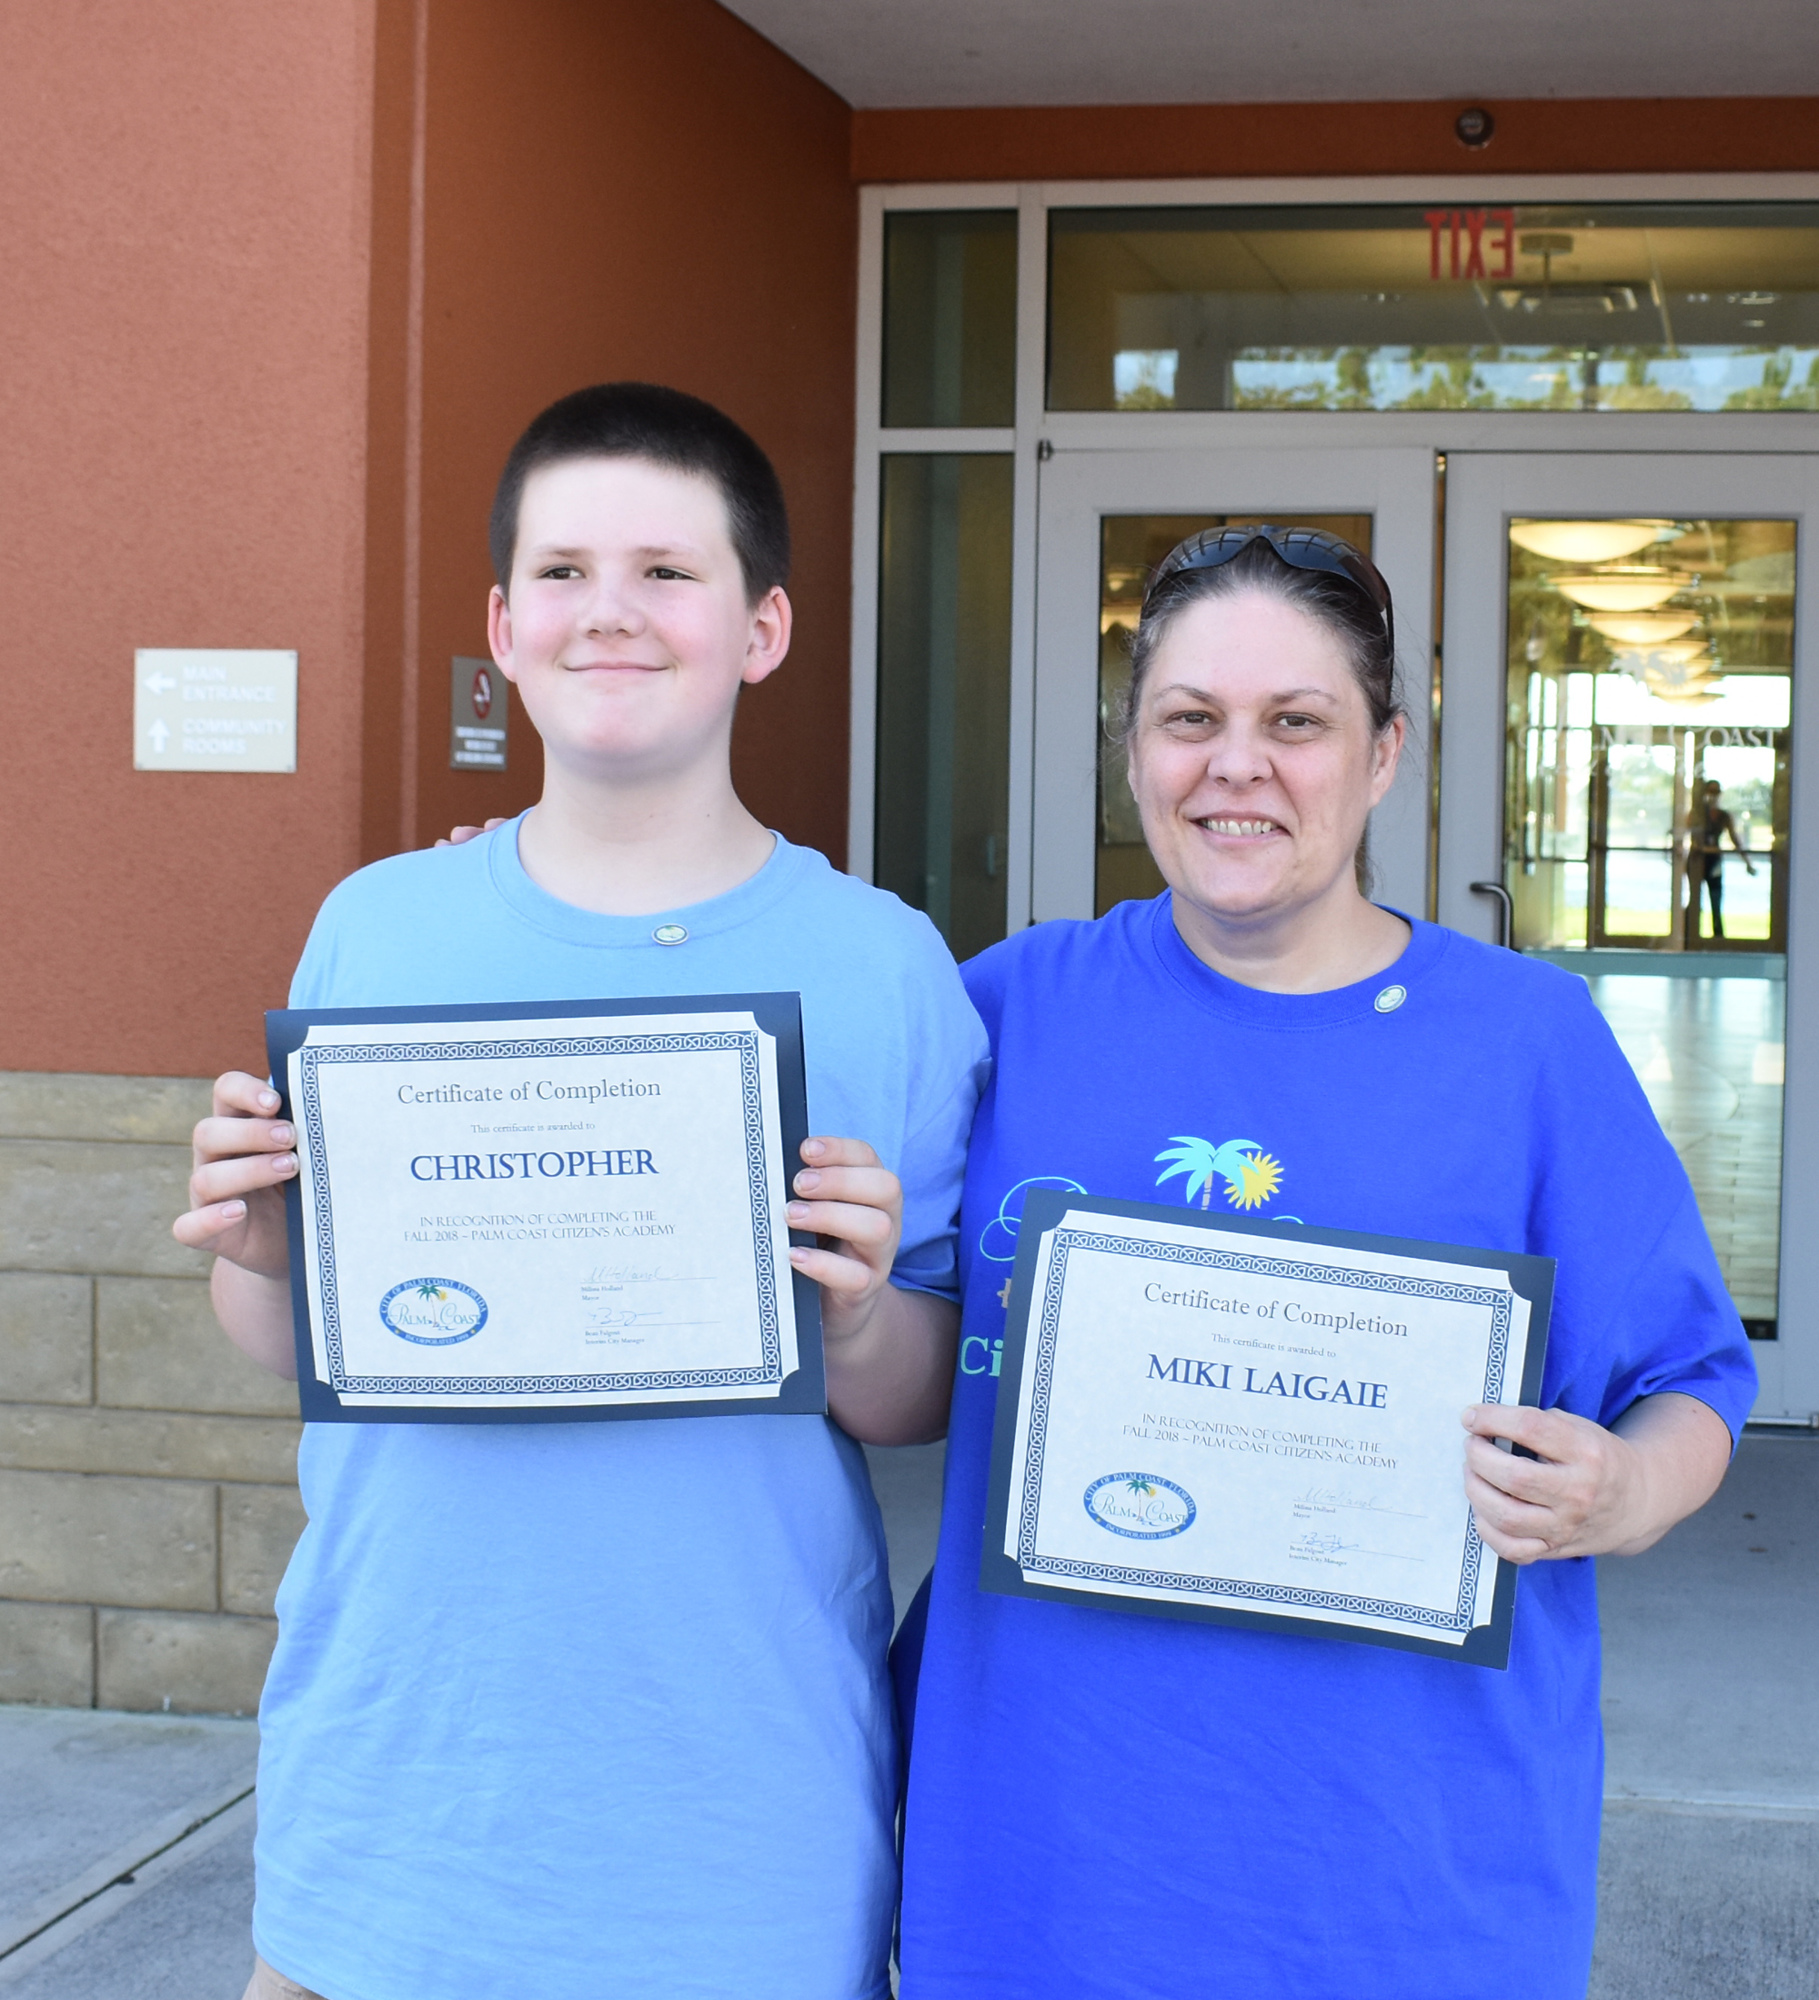 Christopher LaiGaie Jr., 11, and his mother, Miki LaiGaie hold up their Palm Coast Citizen's Academy awards. Photo courtesy of the city of Palm Coast